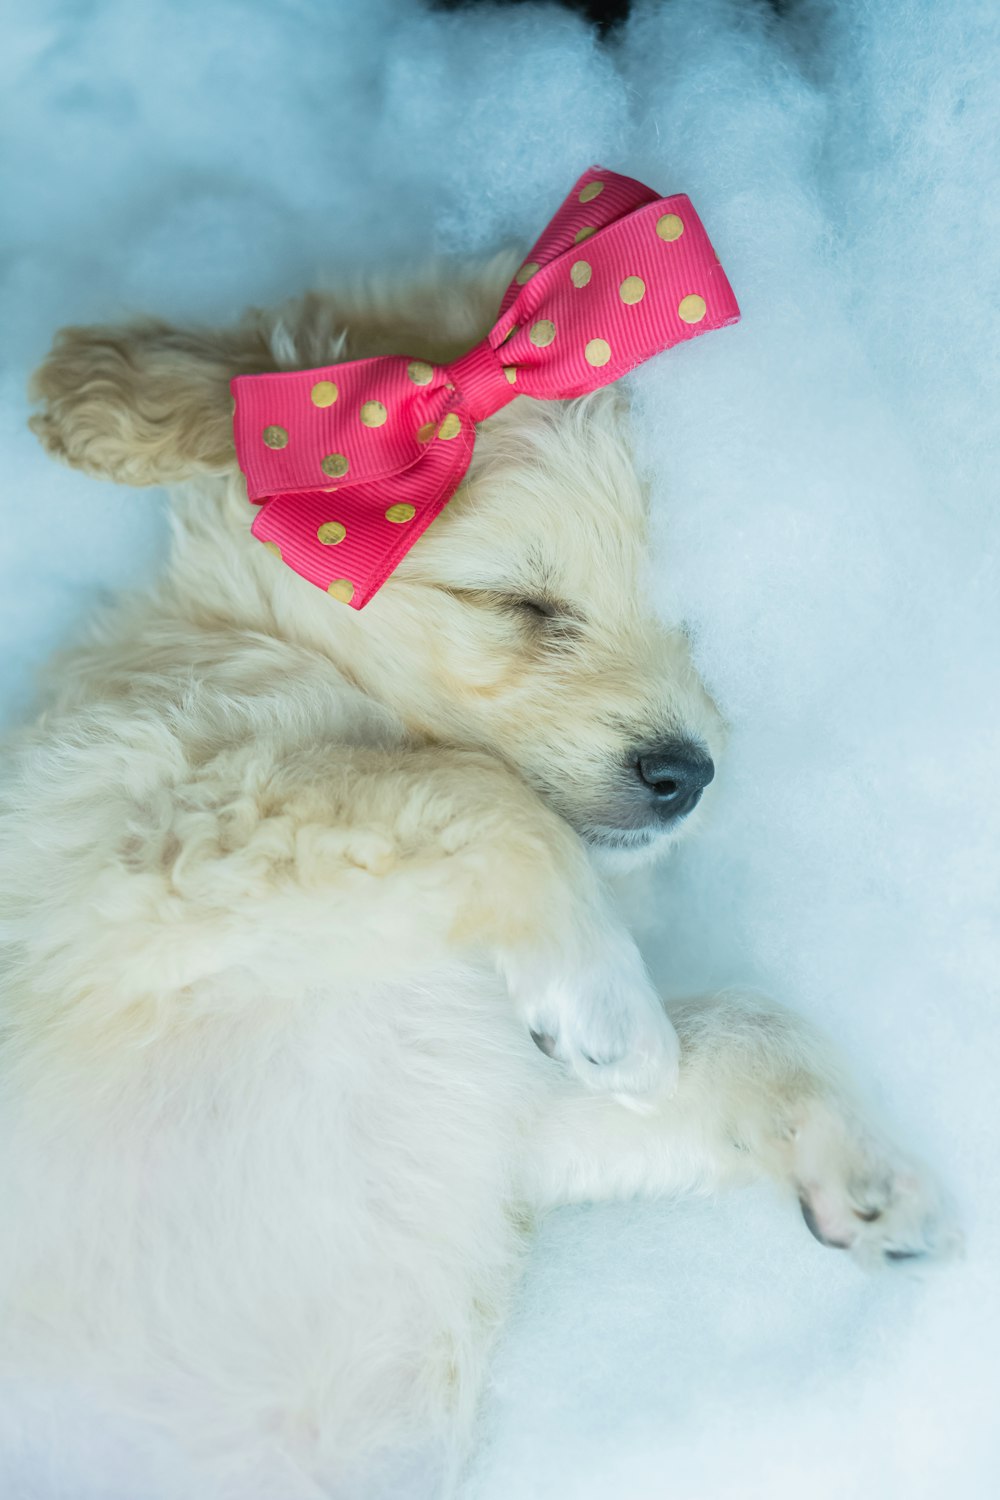 white long coated dog with red and white polka dot bowtie lying on white textile